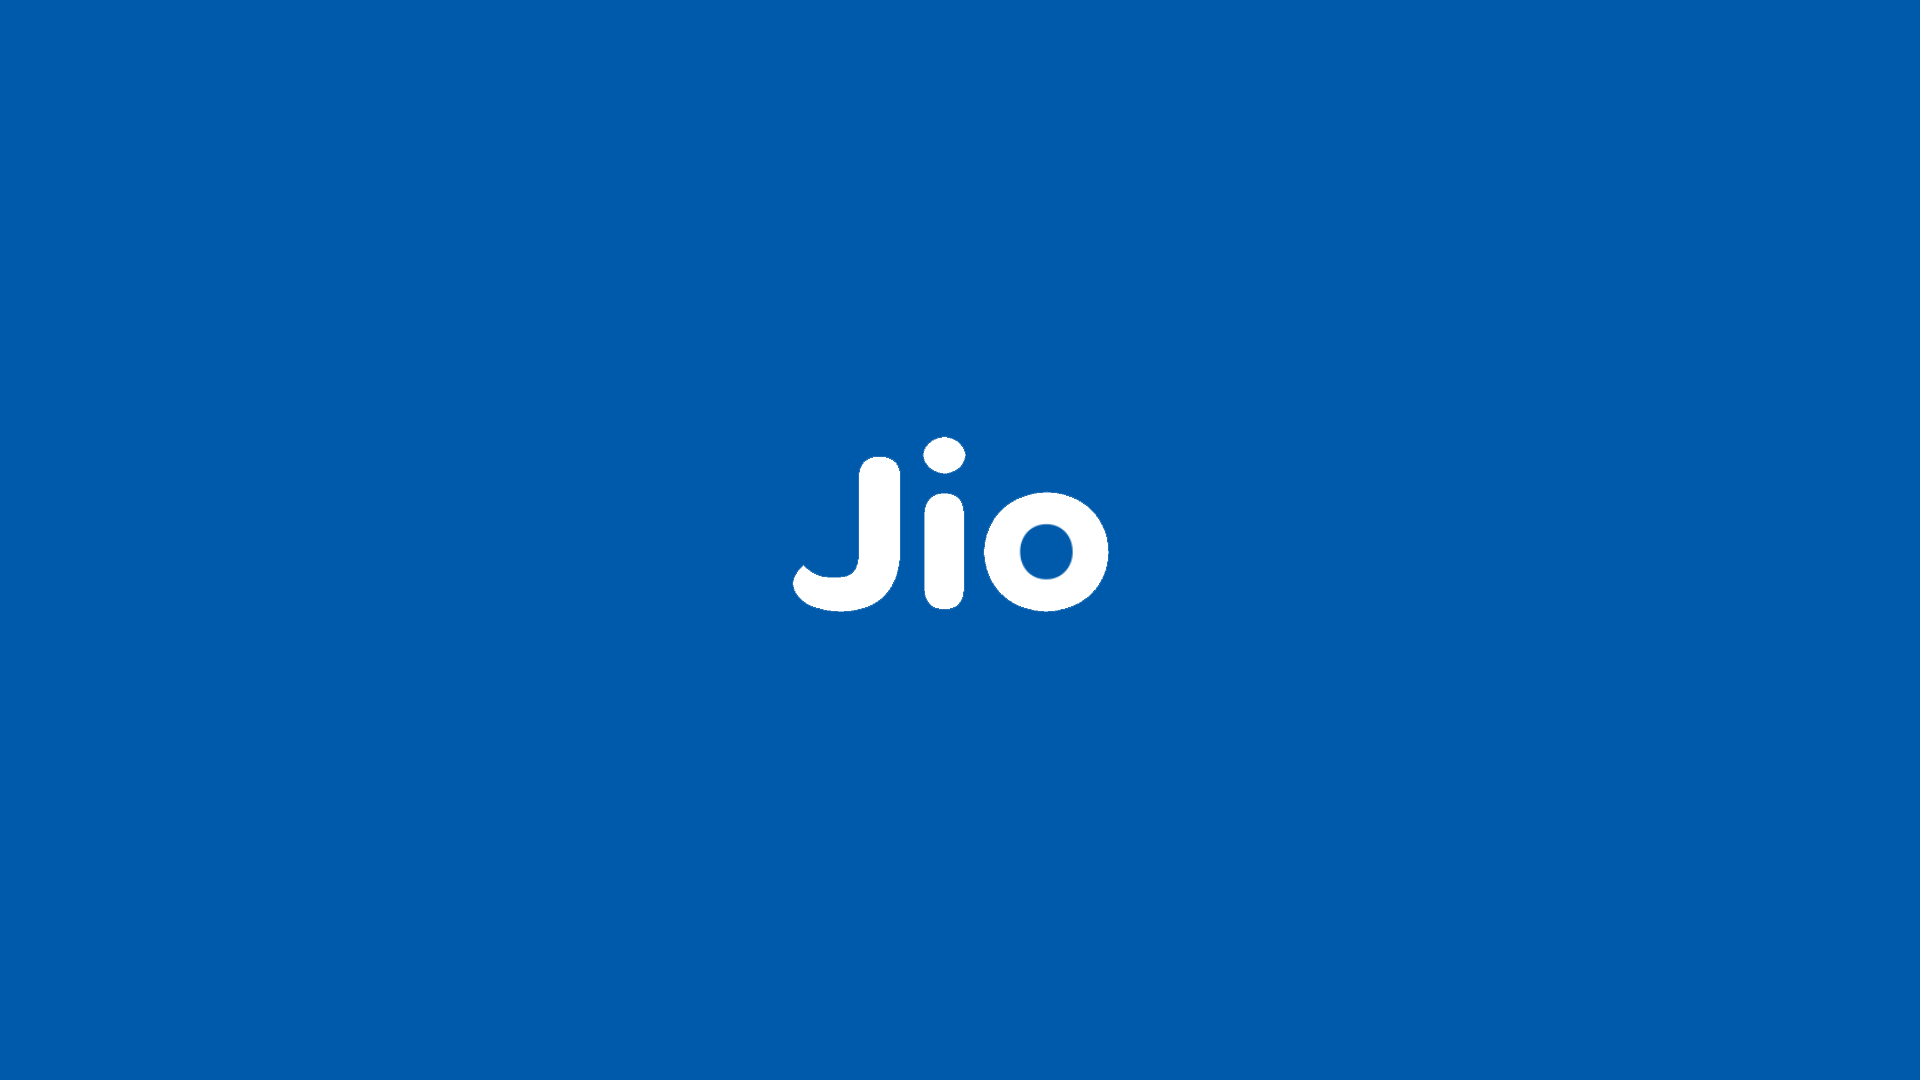 Jio Wallpaper HD, image collections of wallpaper